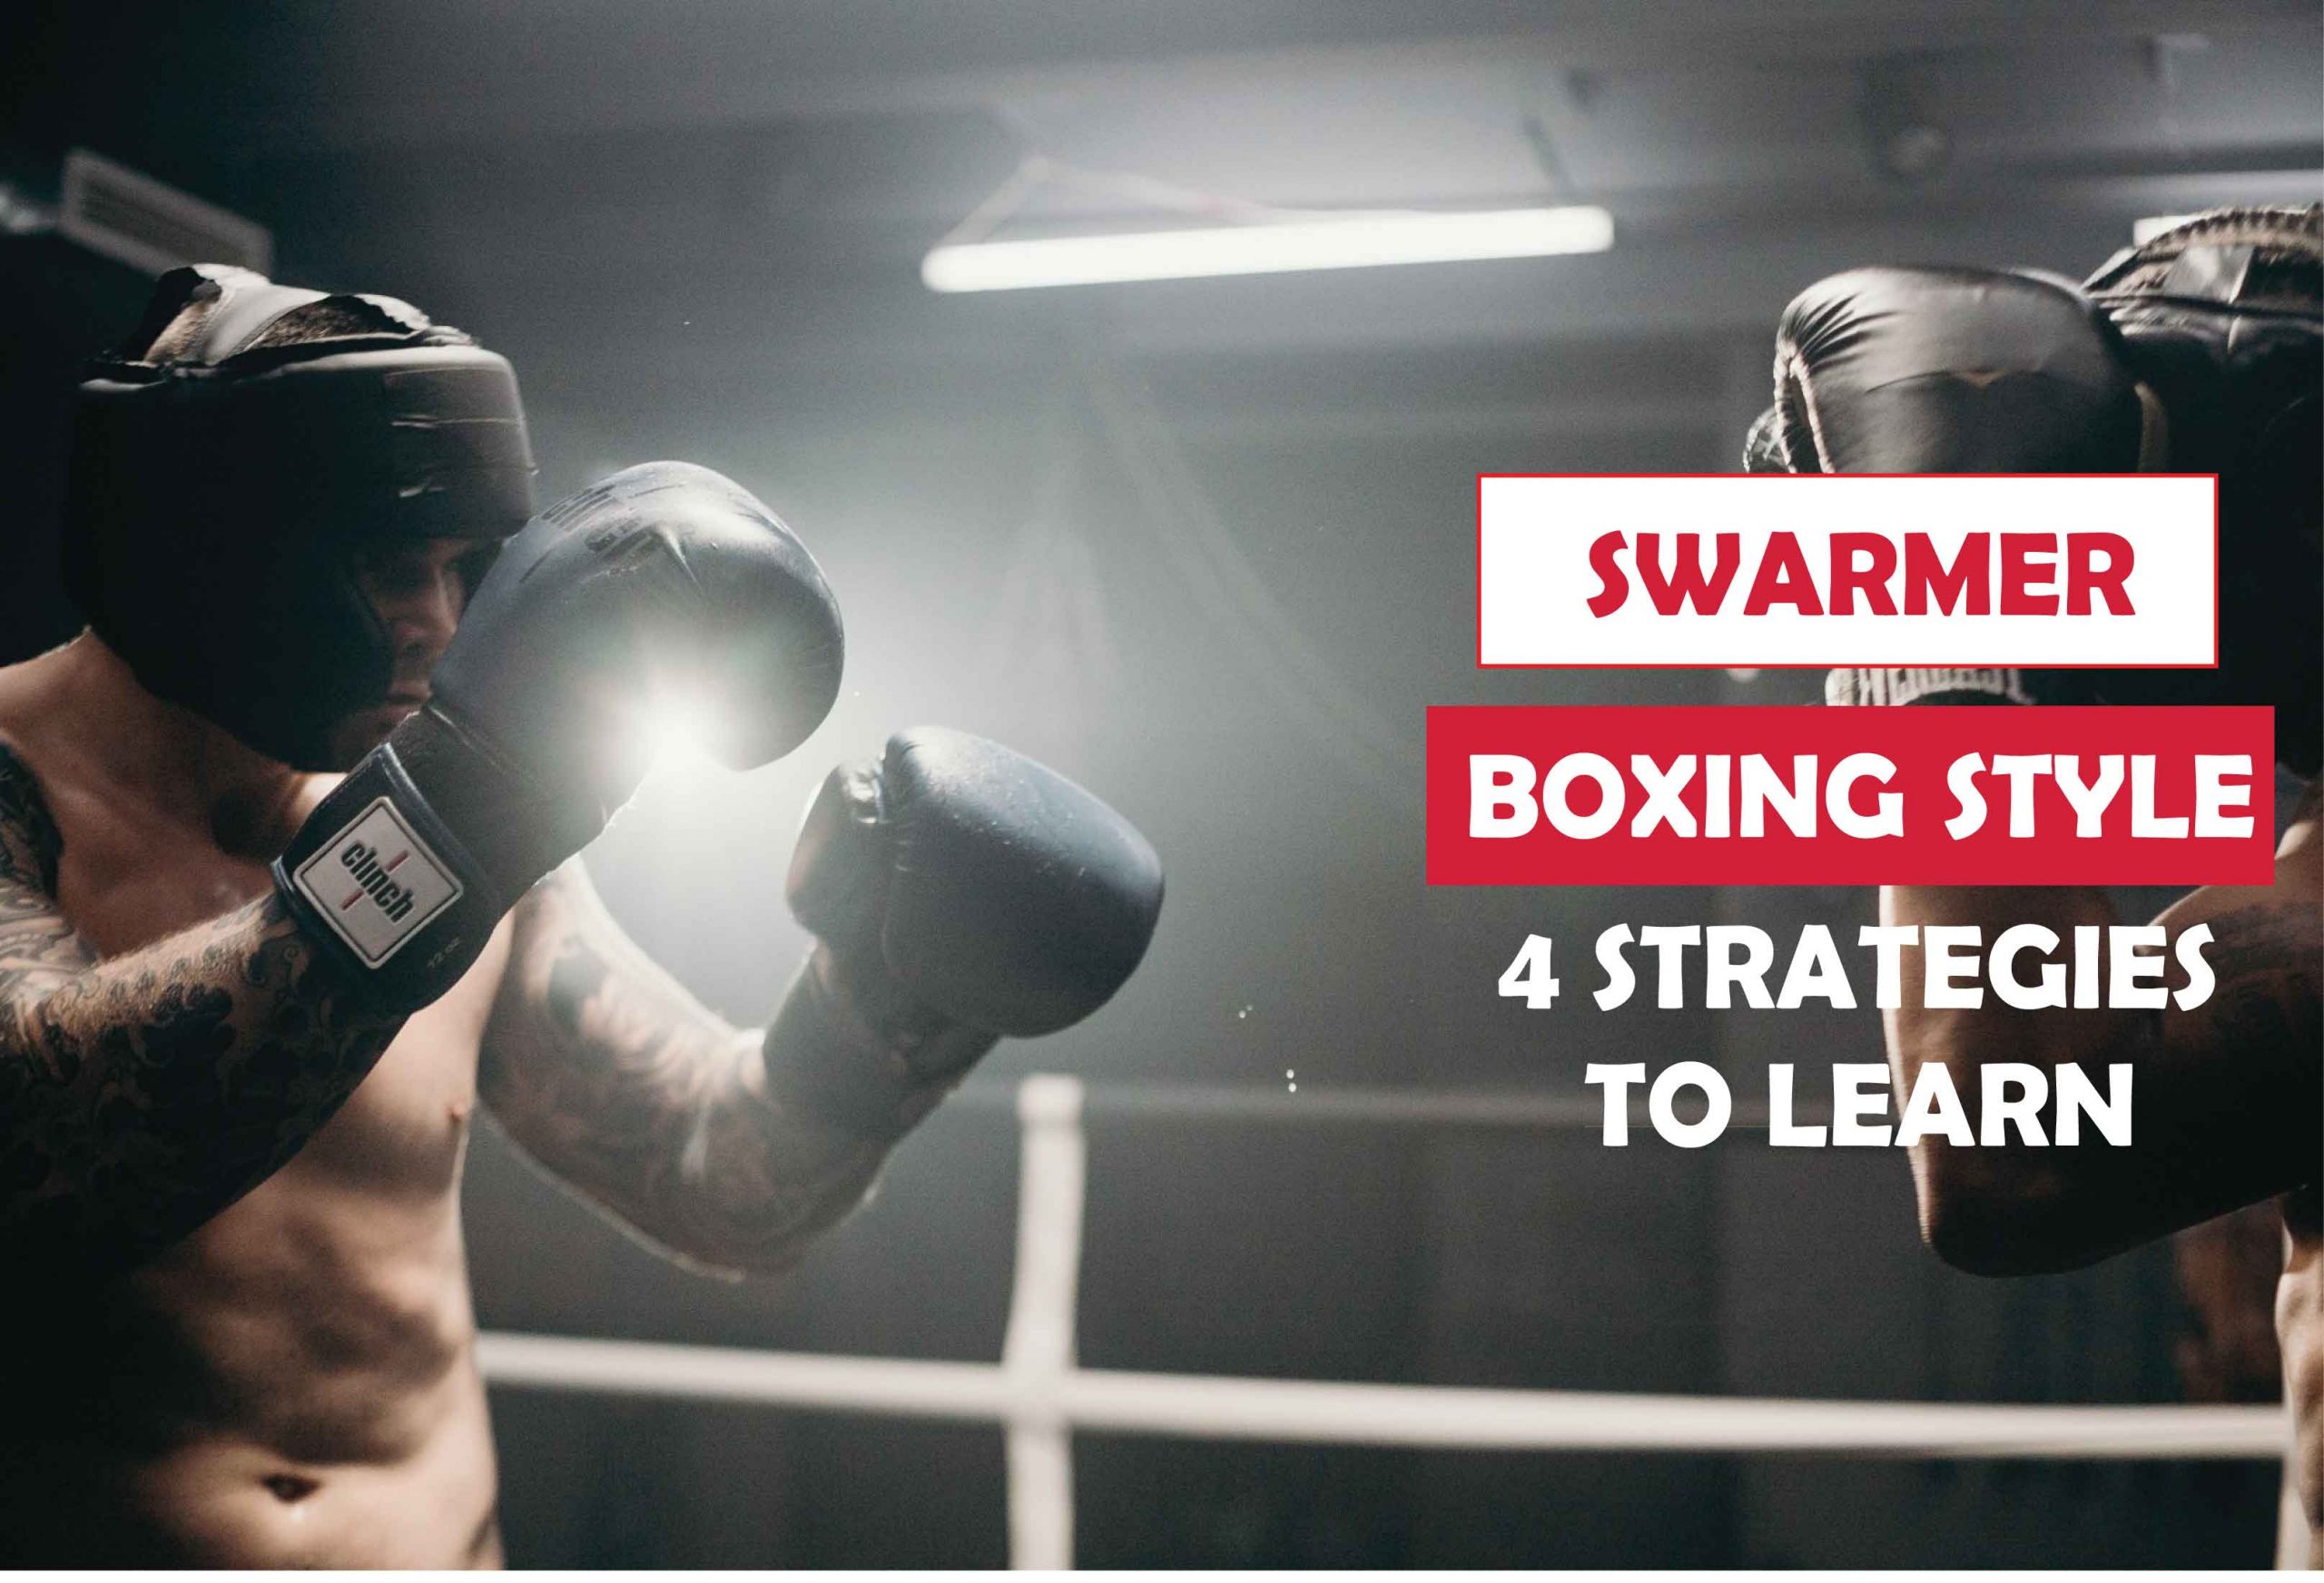 Swarmer Boxing Style? 4 Strategies to Learn